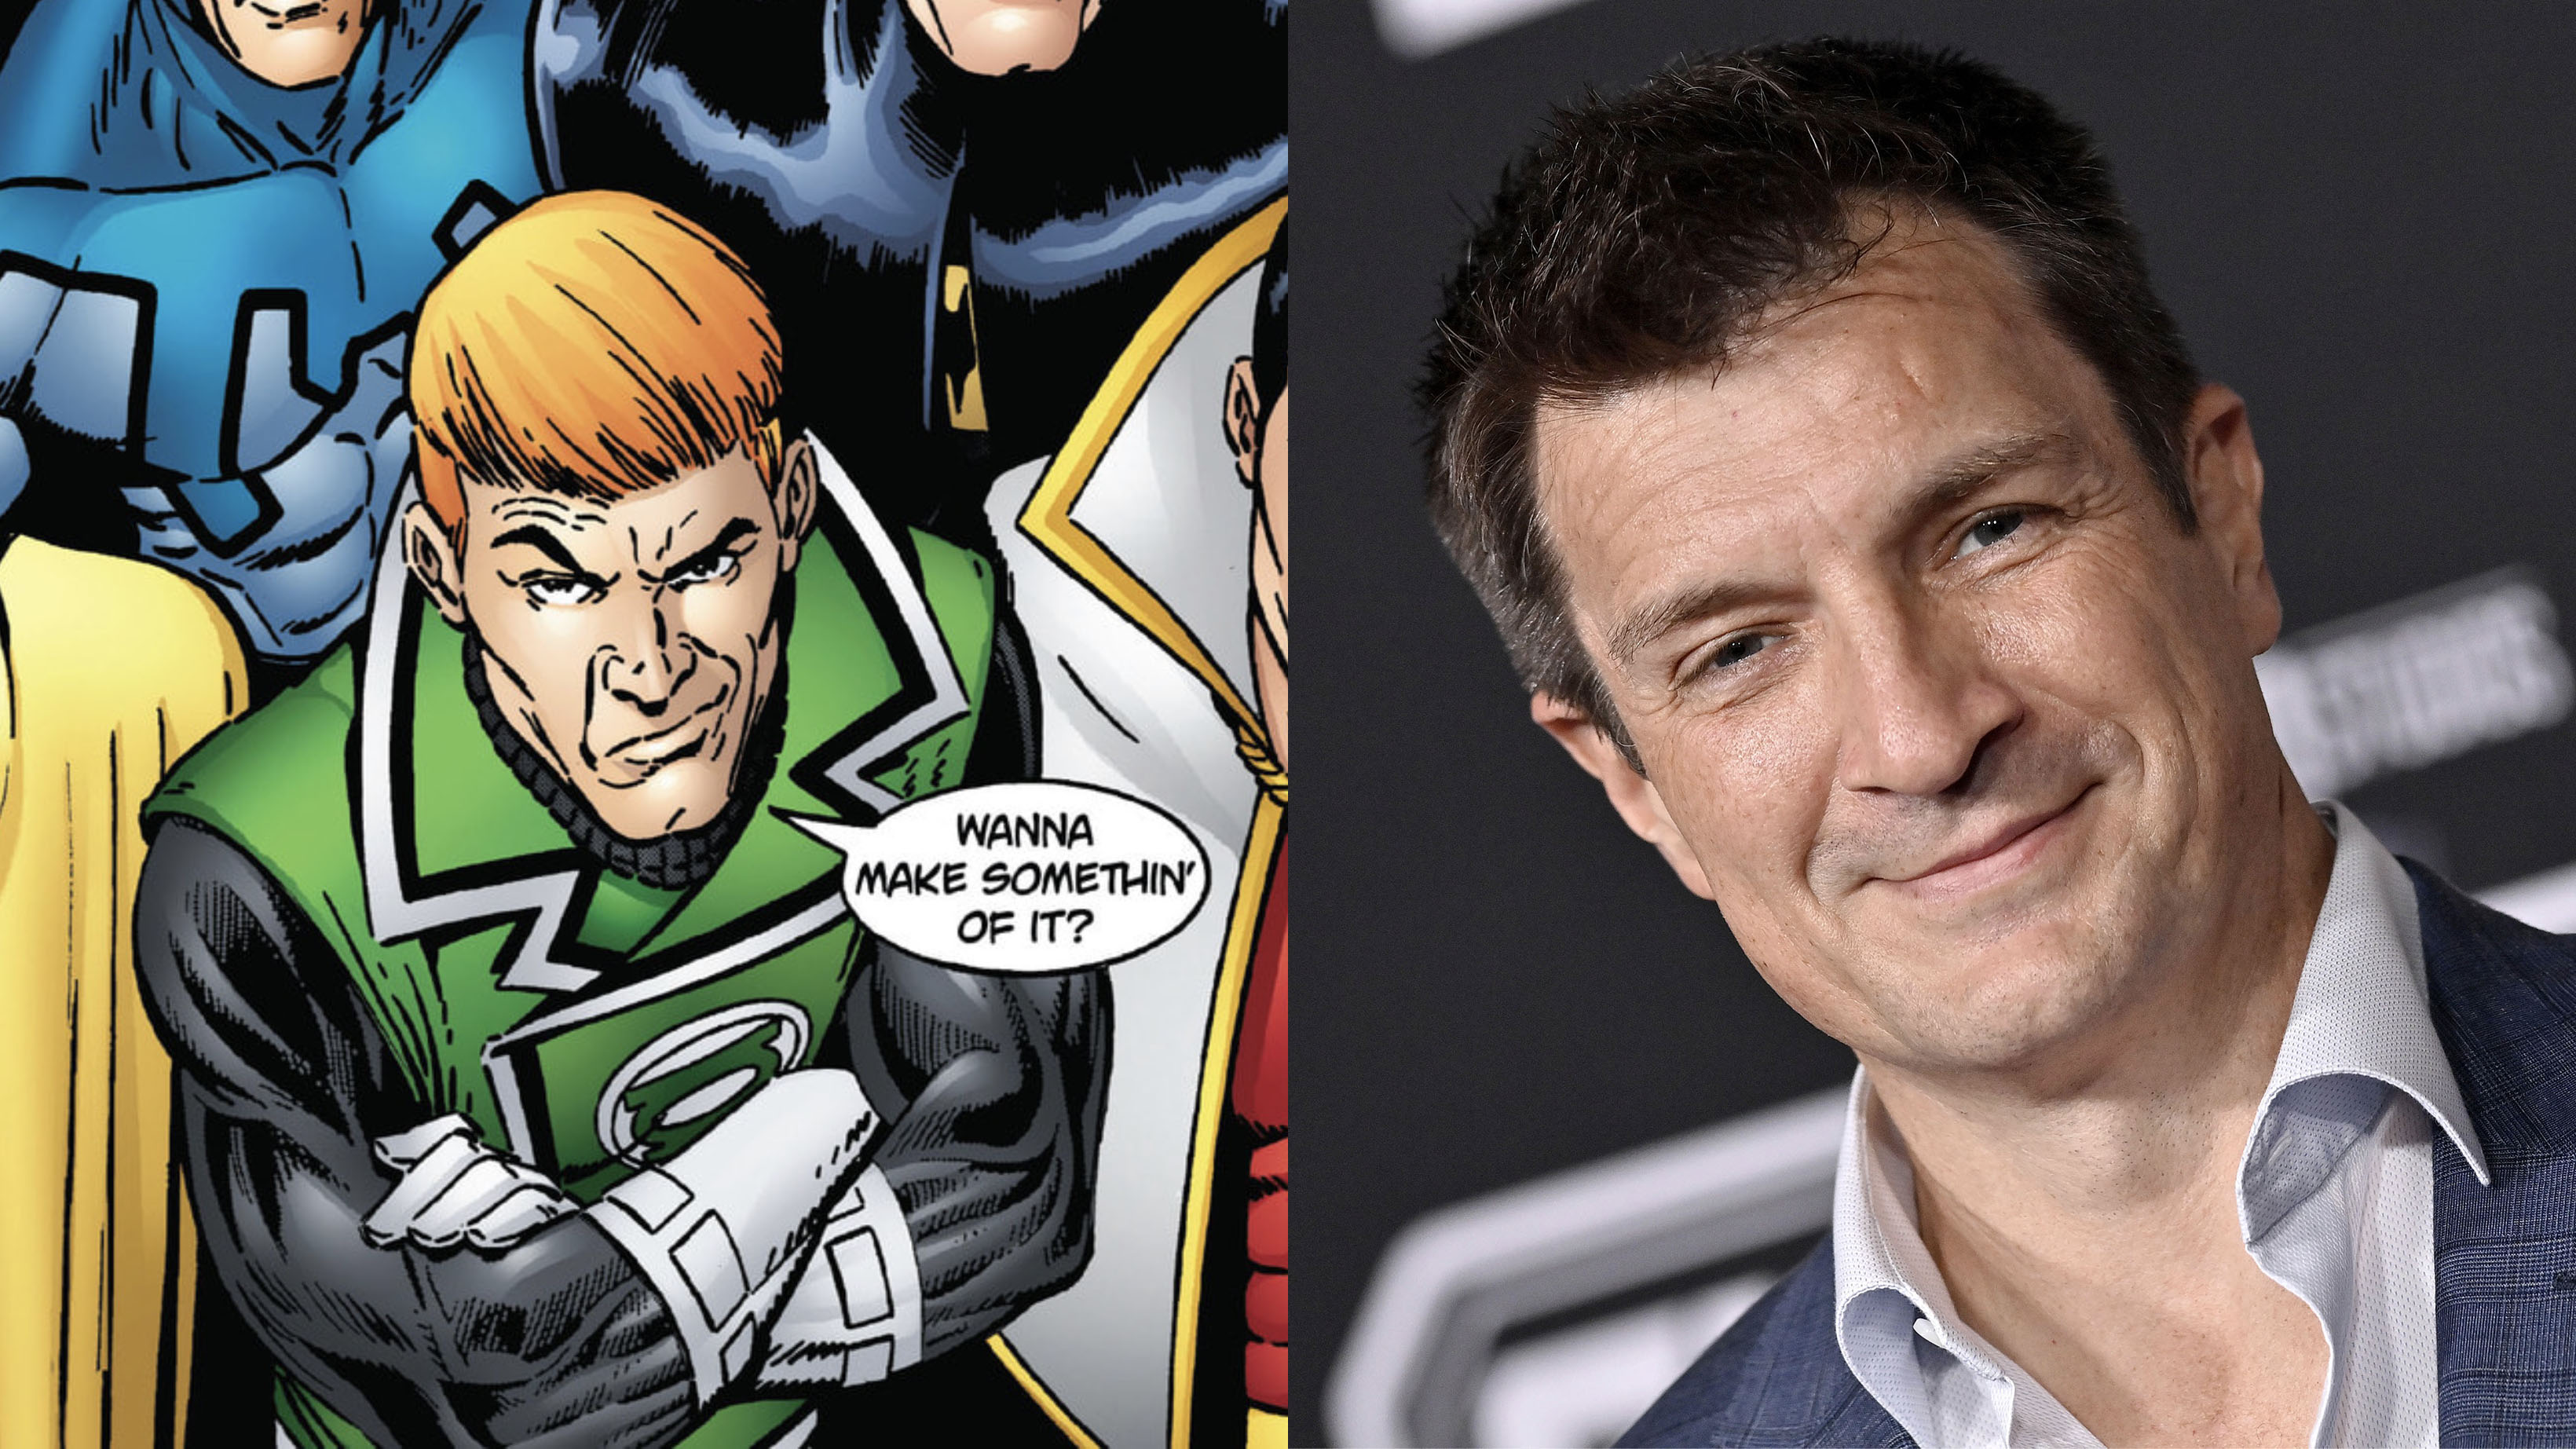 A comic panel featuring Green Lantern (Guy Gardner version) is next to a red carpet photograph of the actor Nathan Fillion.